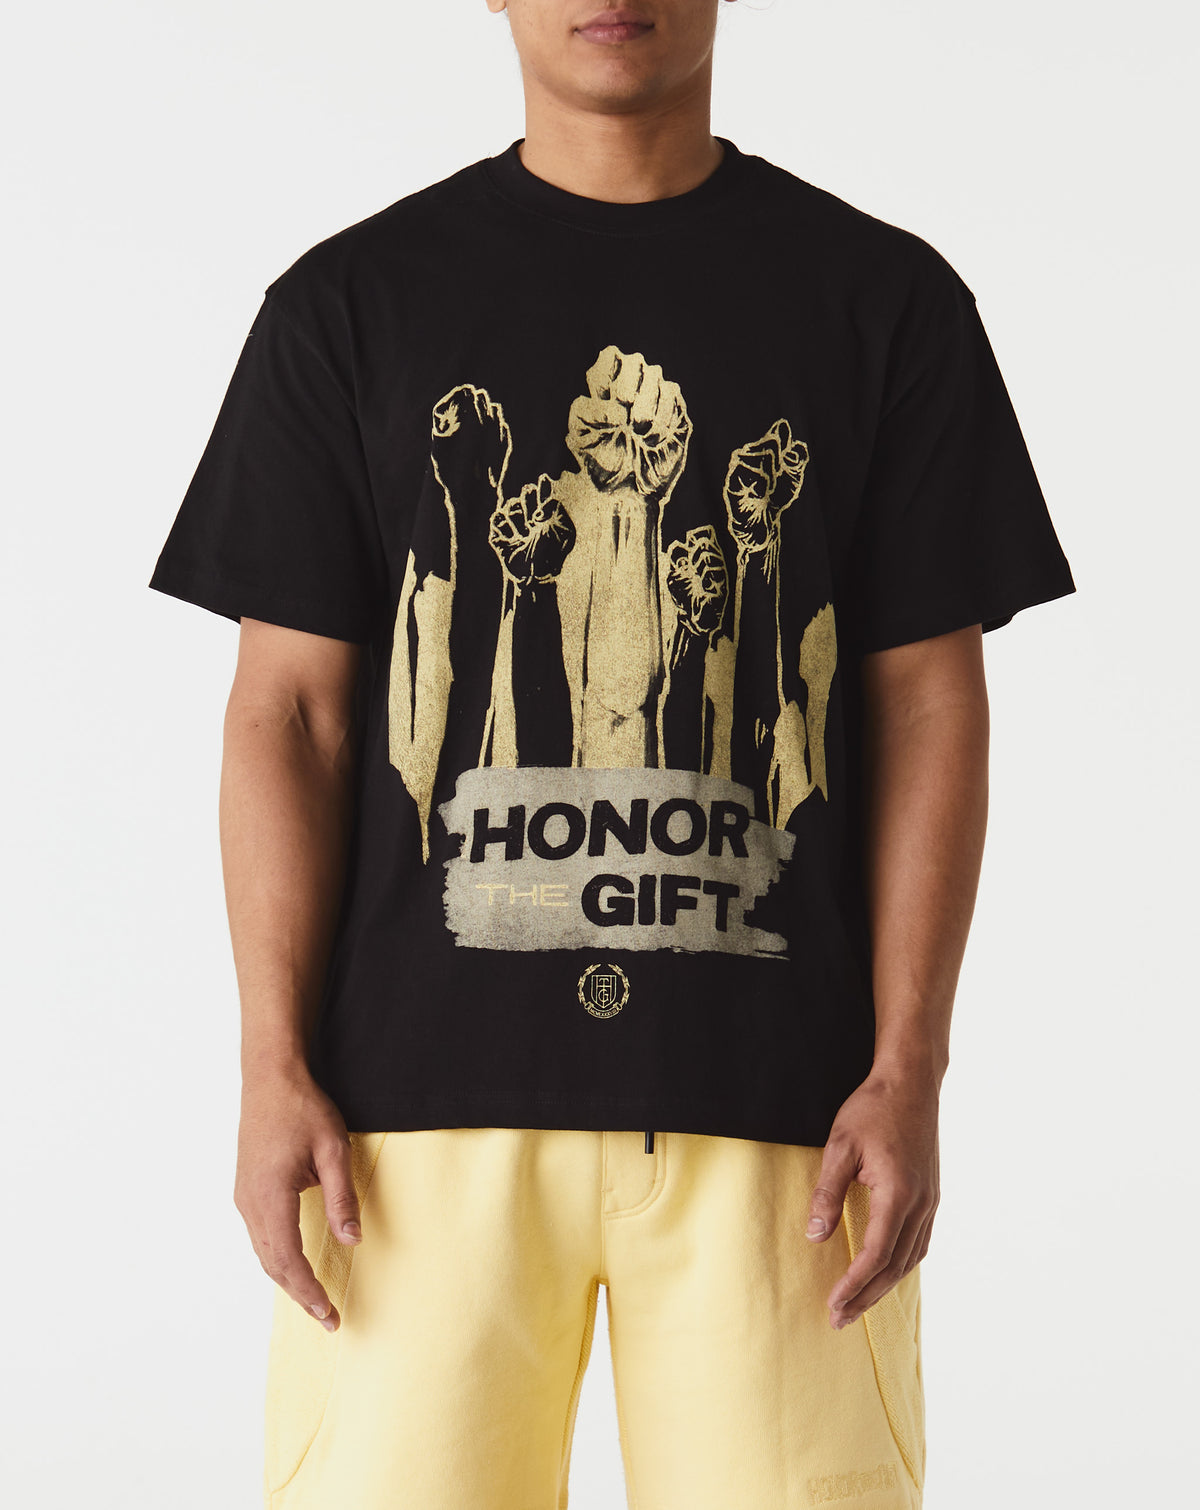 Honor The Gift Dignity T-Shirt - Rule of Next Apparel